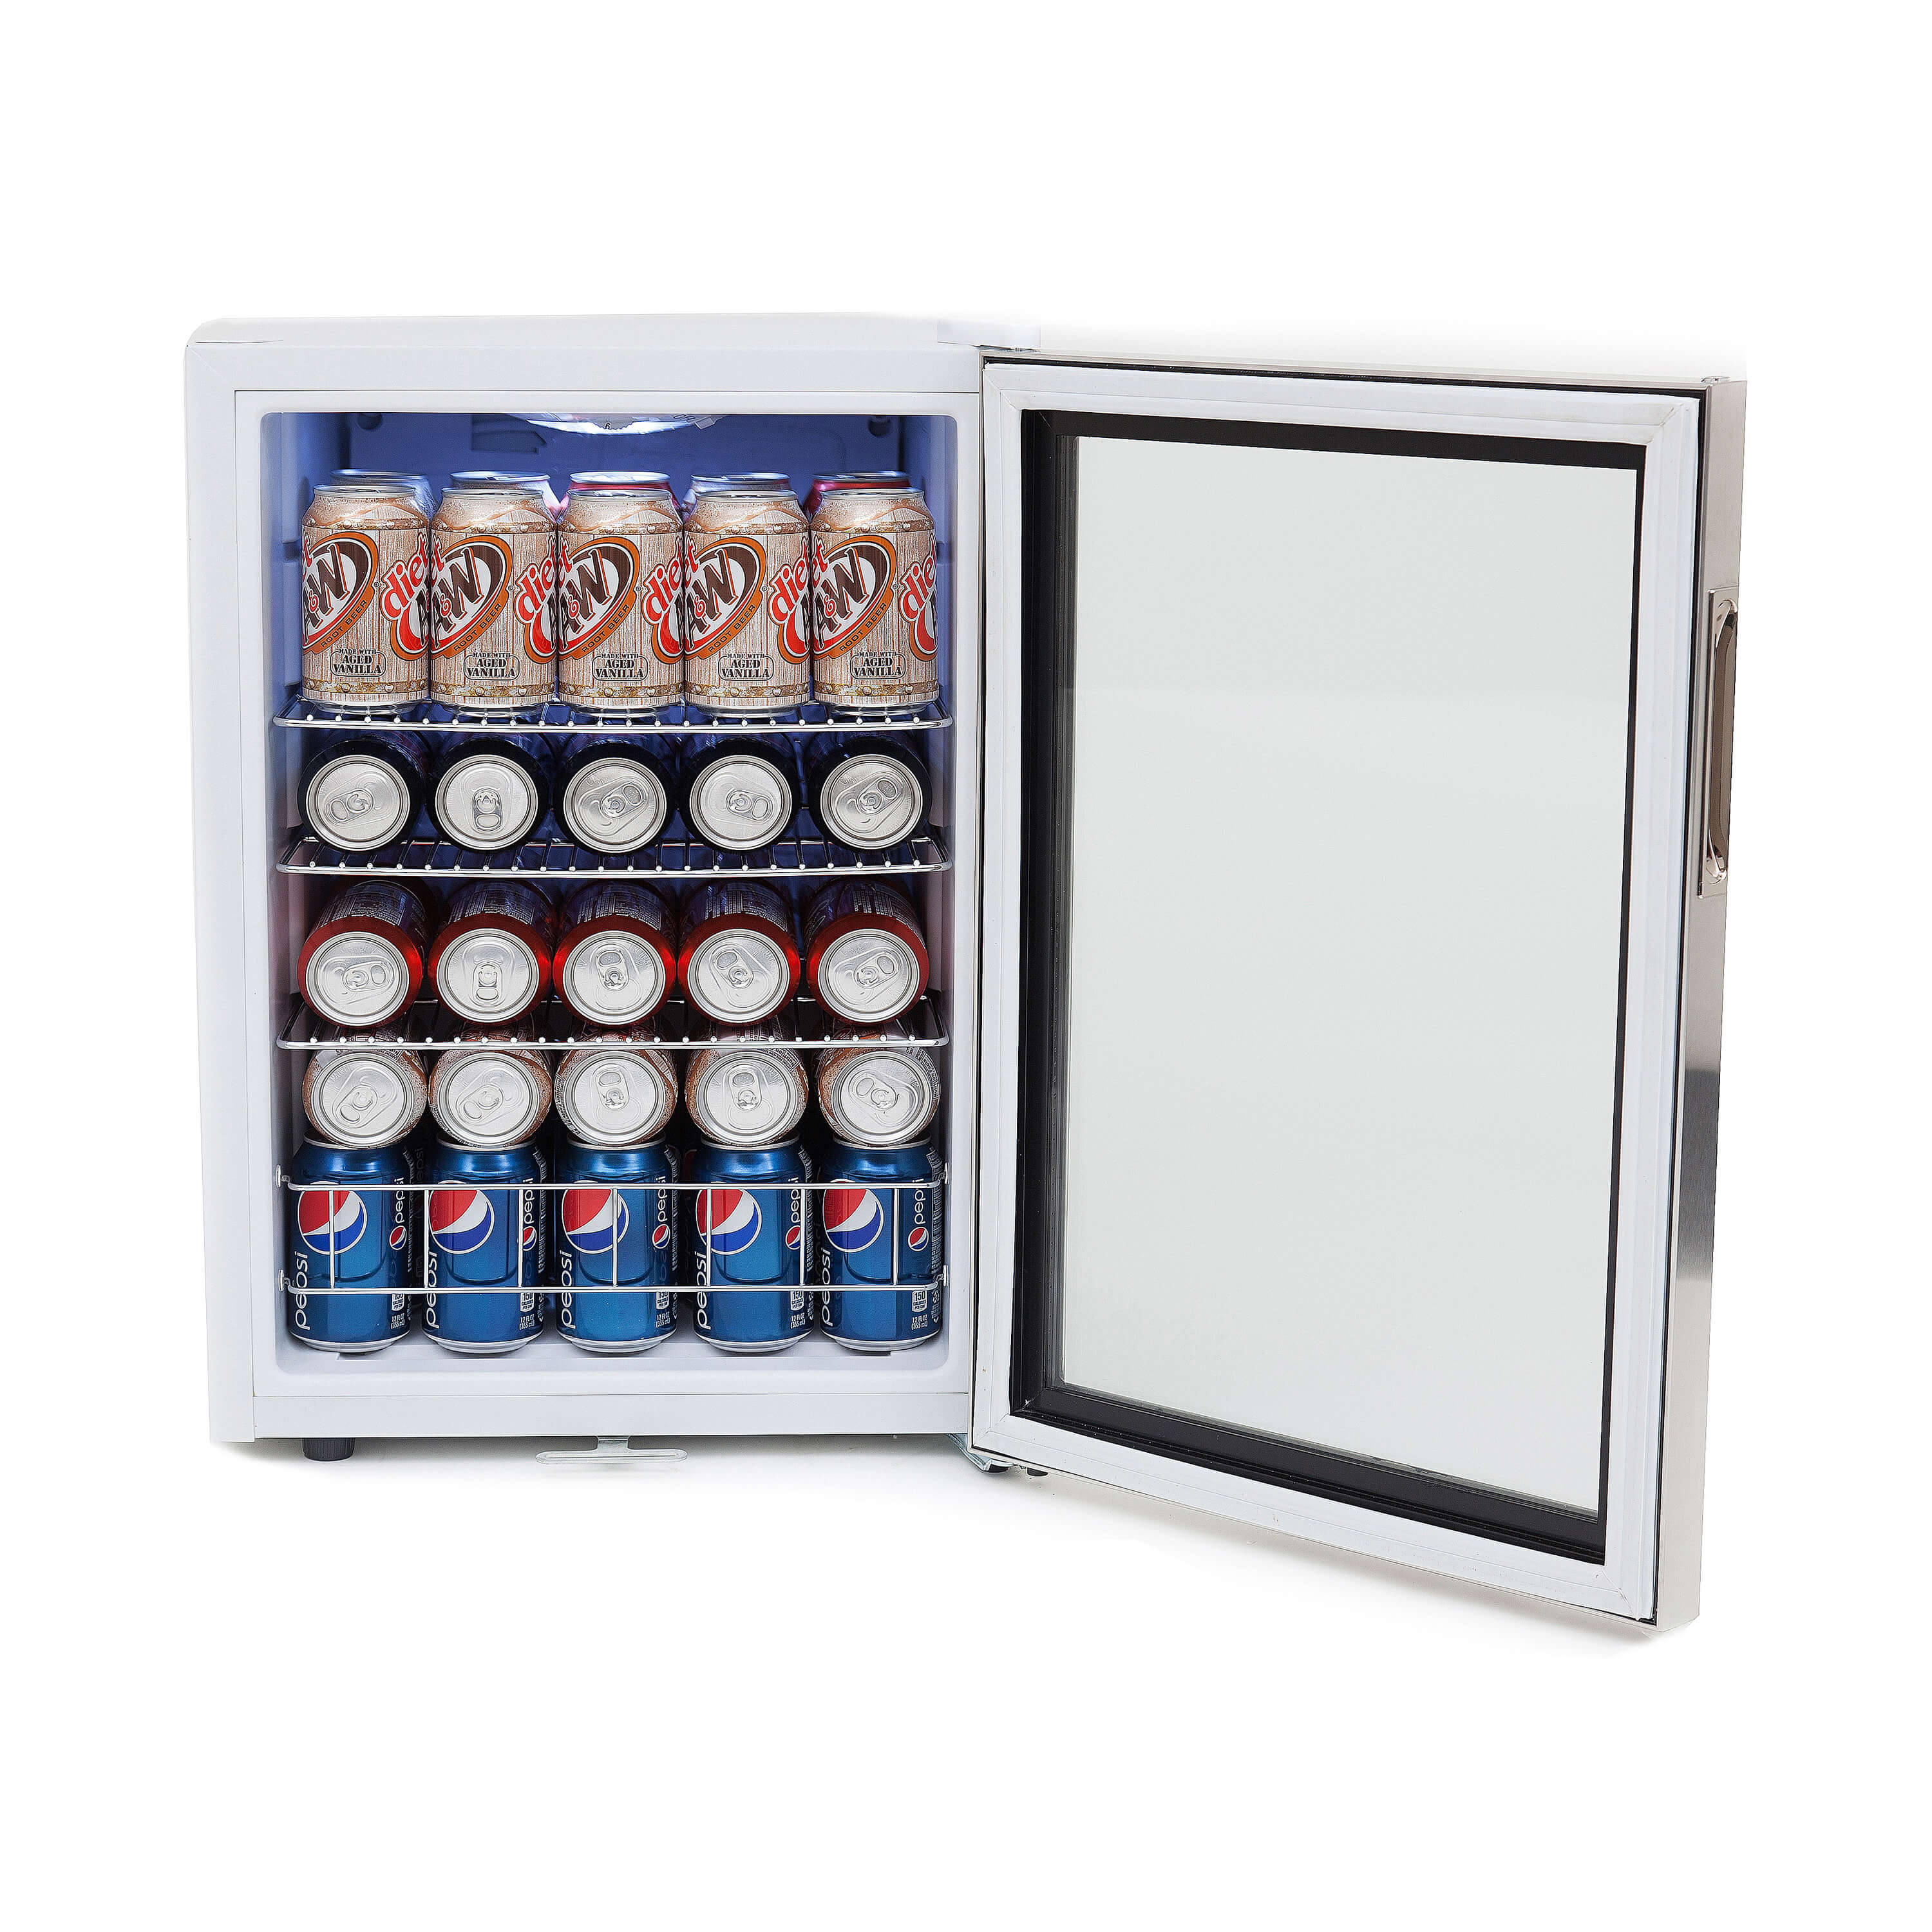 Whynter - Beverage Refrigerator With Lock - Stainless Steel 90 Can Capacity | BR-091WS